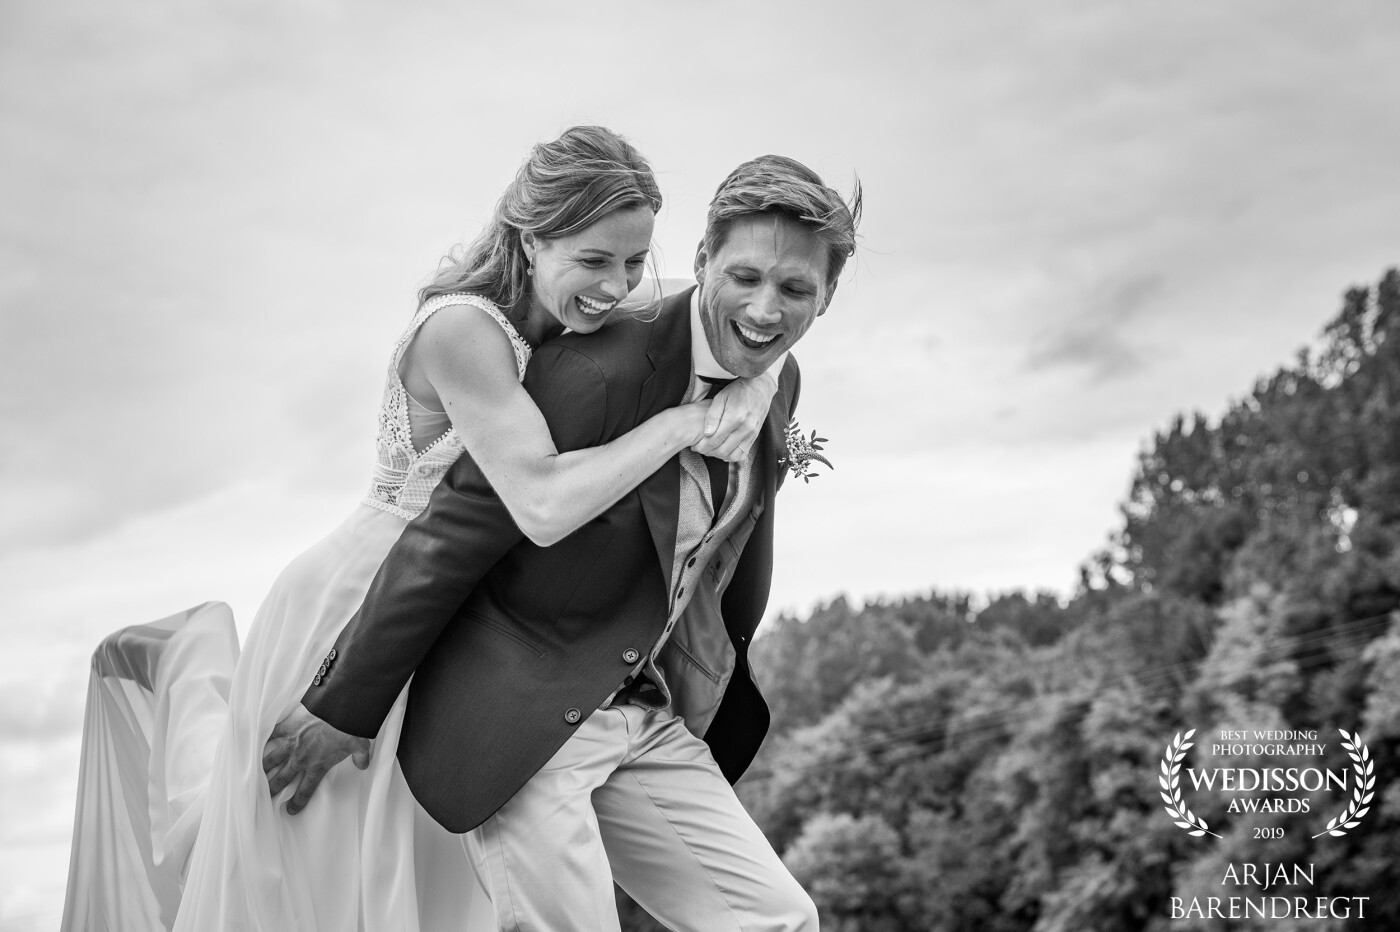 This picture was made during a great wedding weekend in France.<br />
This lovely wedding couple took us to a water lock where we enjoyed the beautiful surrounding and where we had fun during the shoot. 